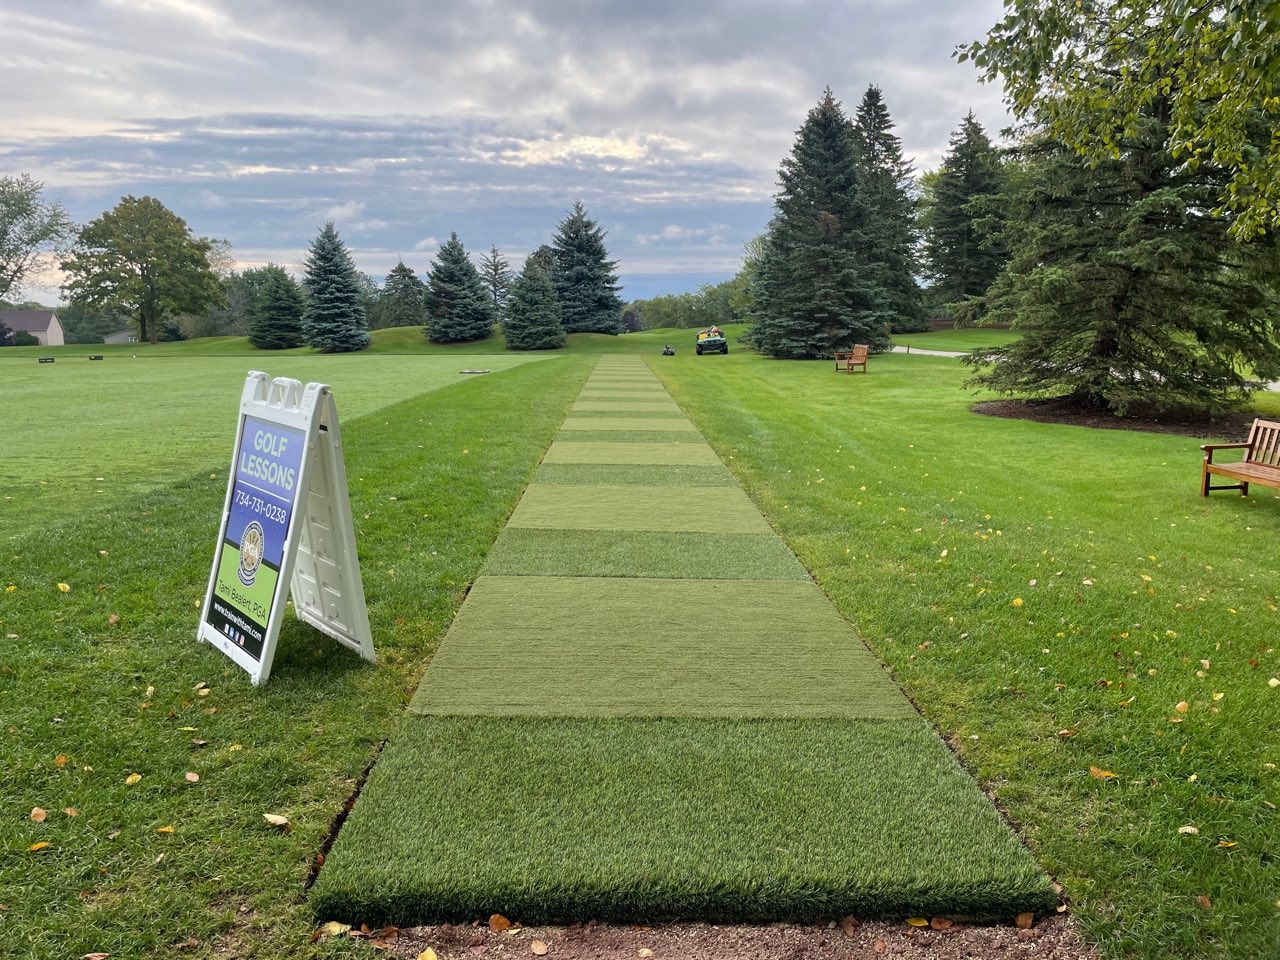 A golf driving range with artificial turf mats aligned in a row, a sign advertising golf lessons, trees, grass, and a bench under an overcast sky.